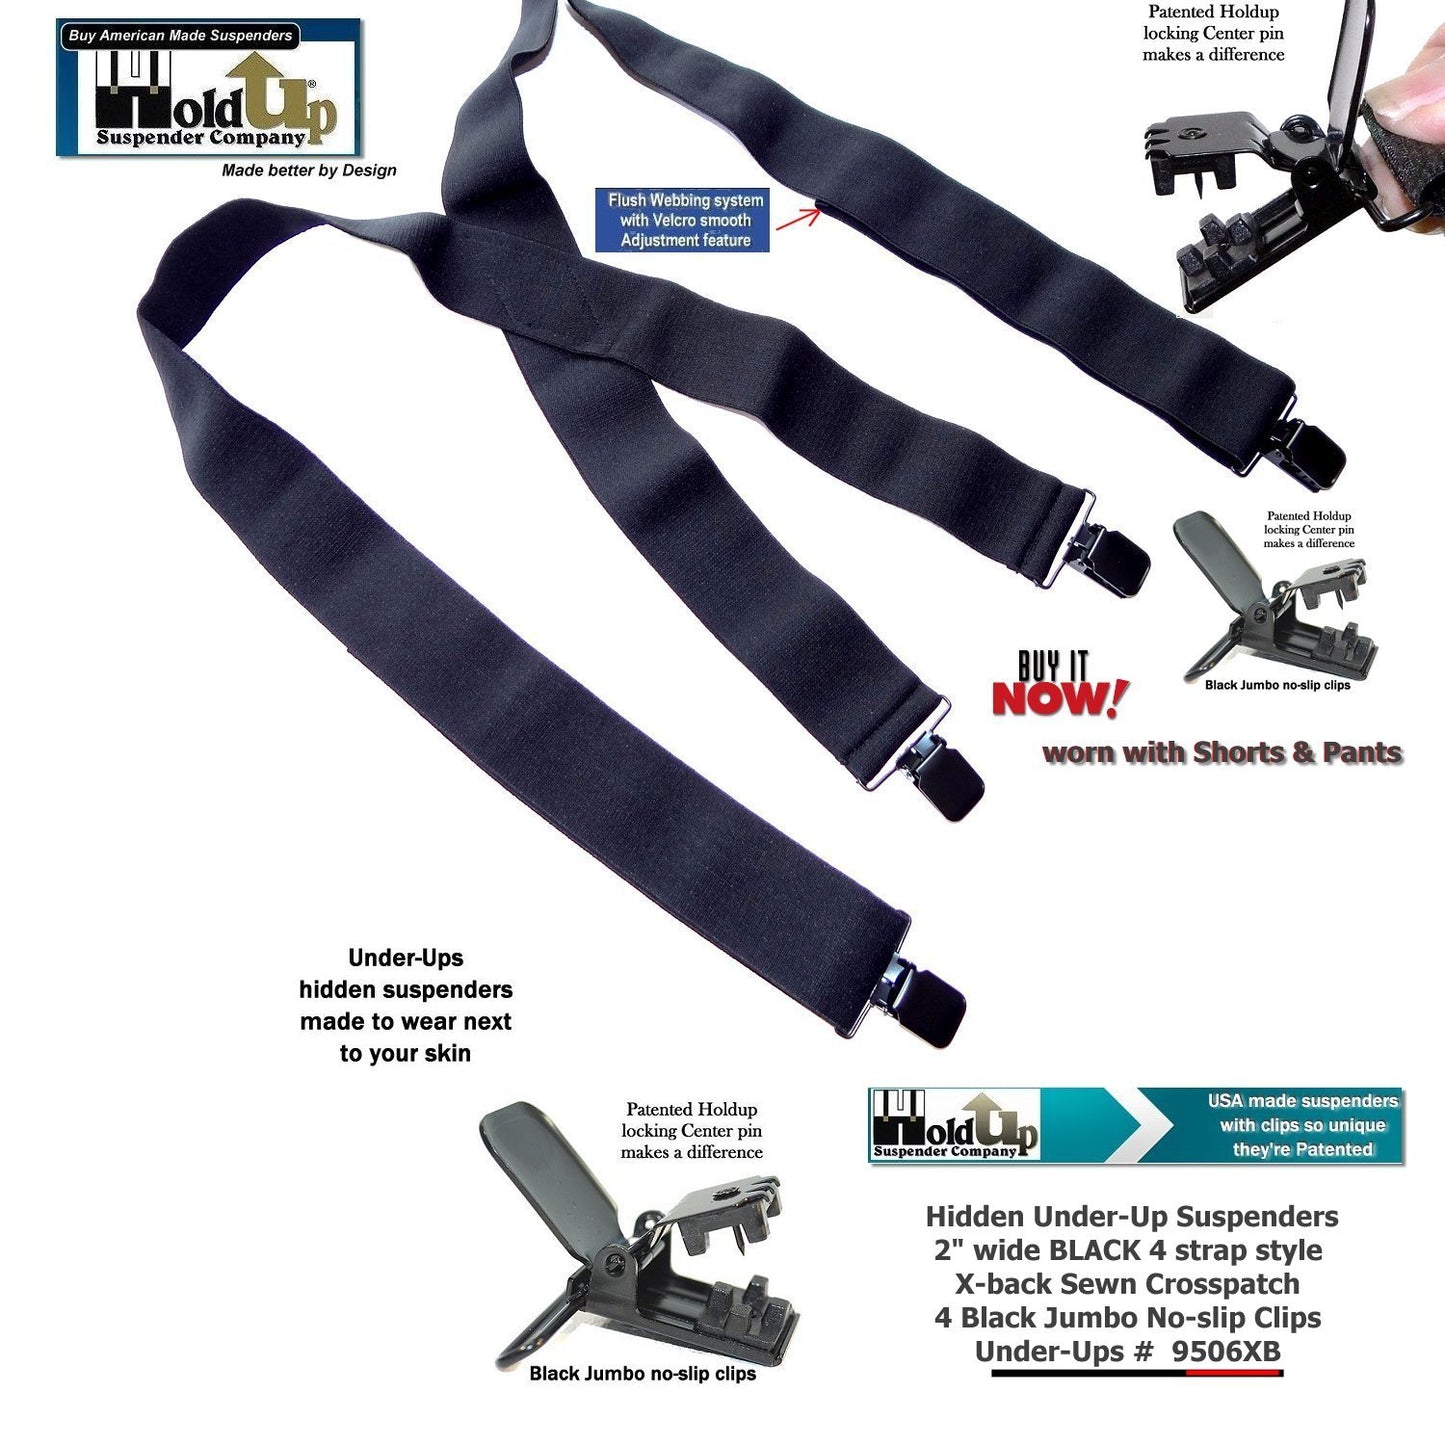 Holdup Wide All Black Undergarment Hidden X-back Suspenders with Patented Black Jumbo No-slip Clips